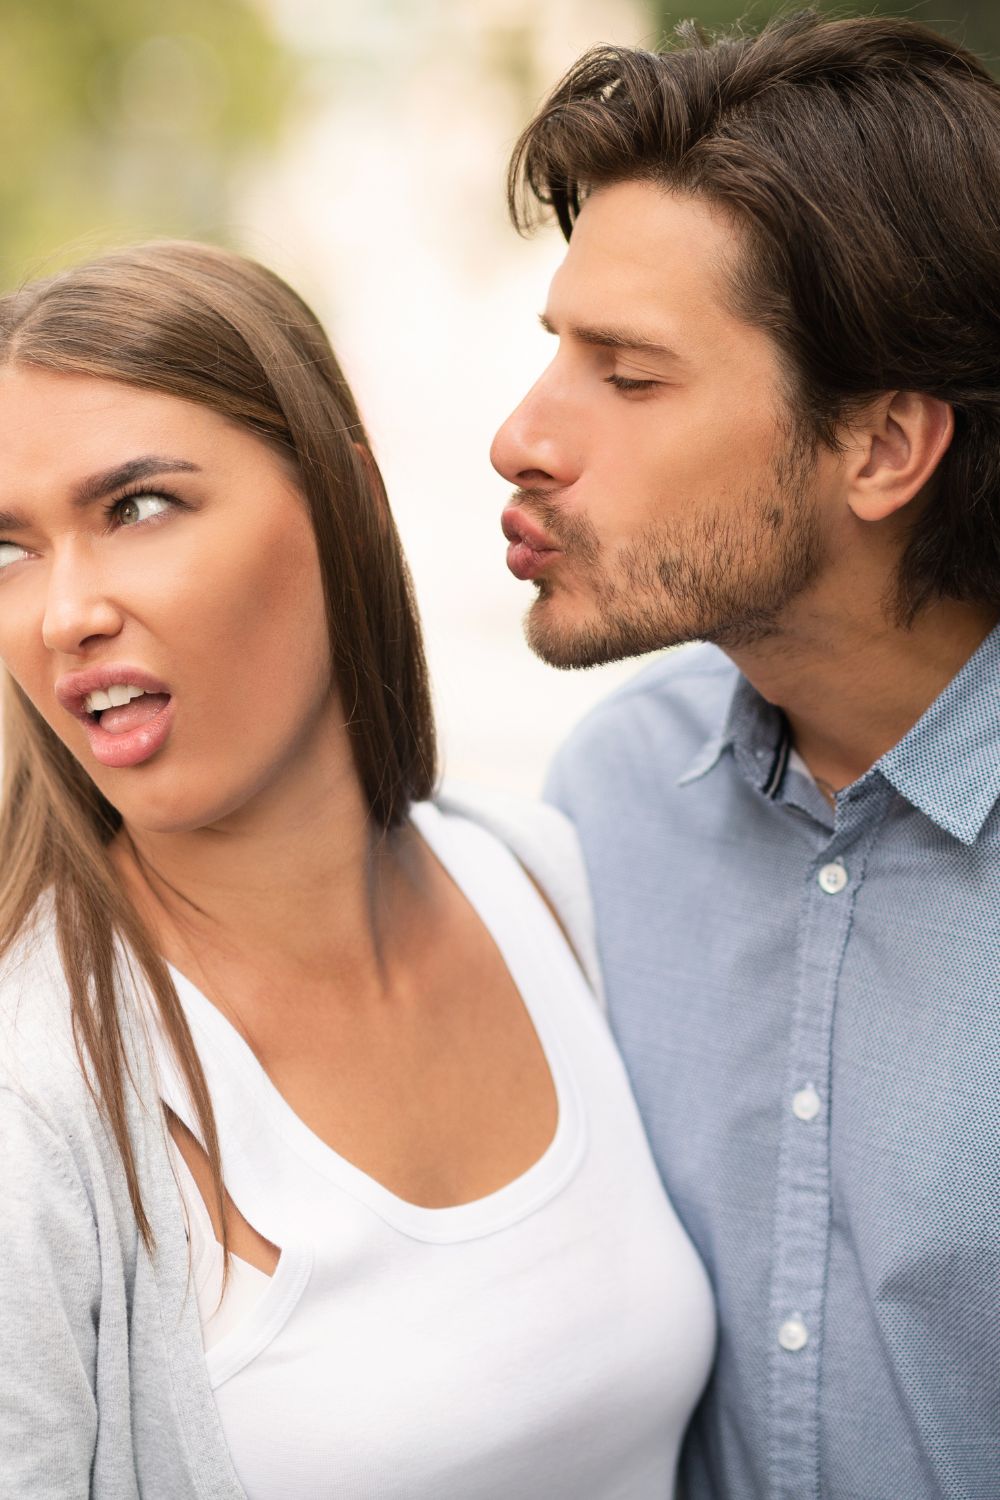 Why do married couples stop kissing?